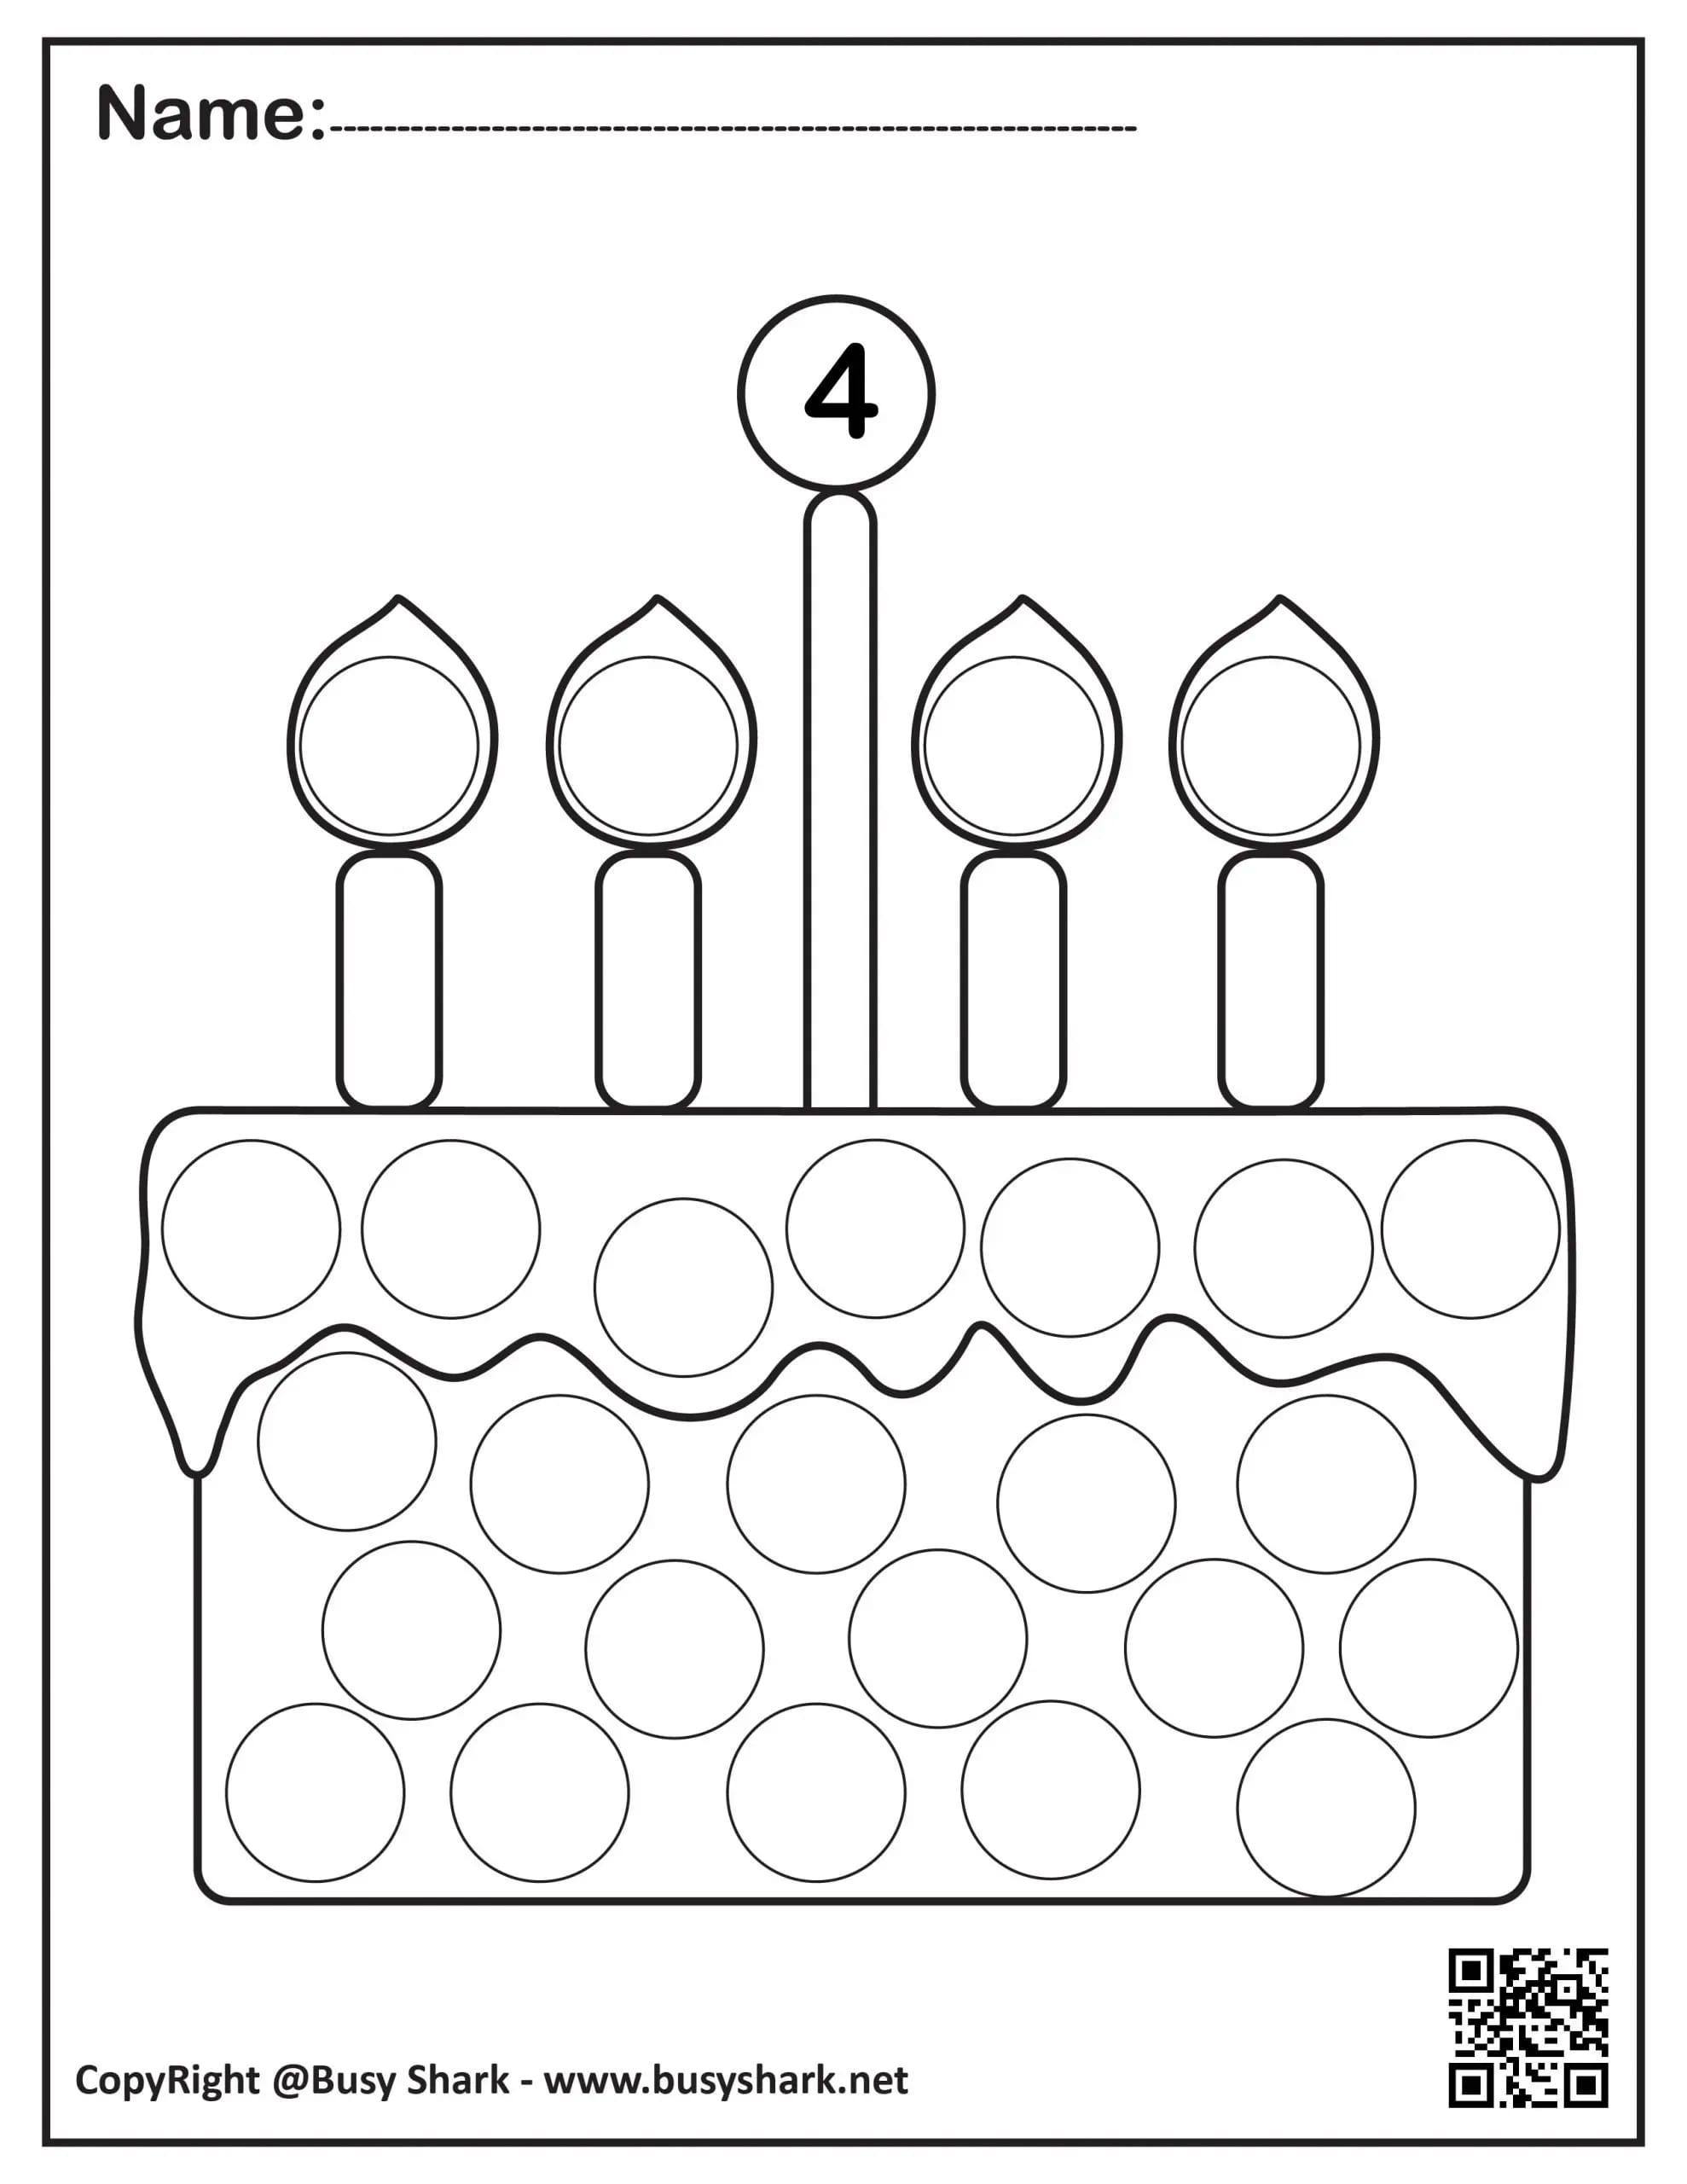 Numbers birthday cake dot activity free coloring pages